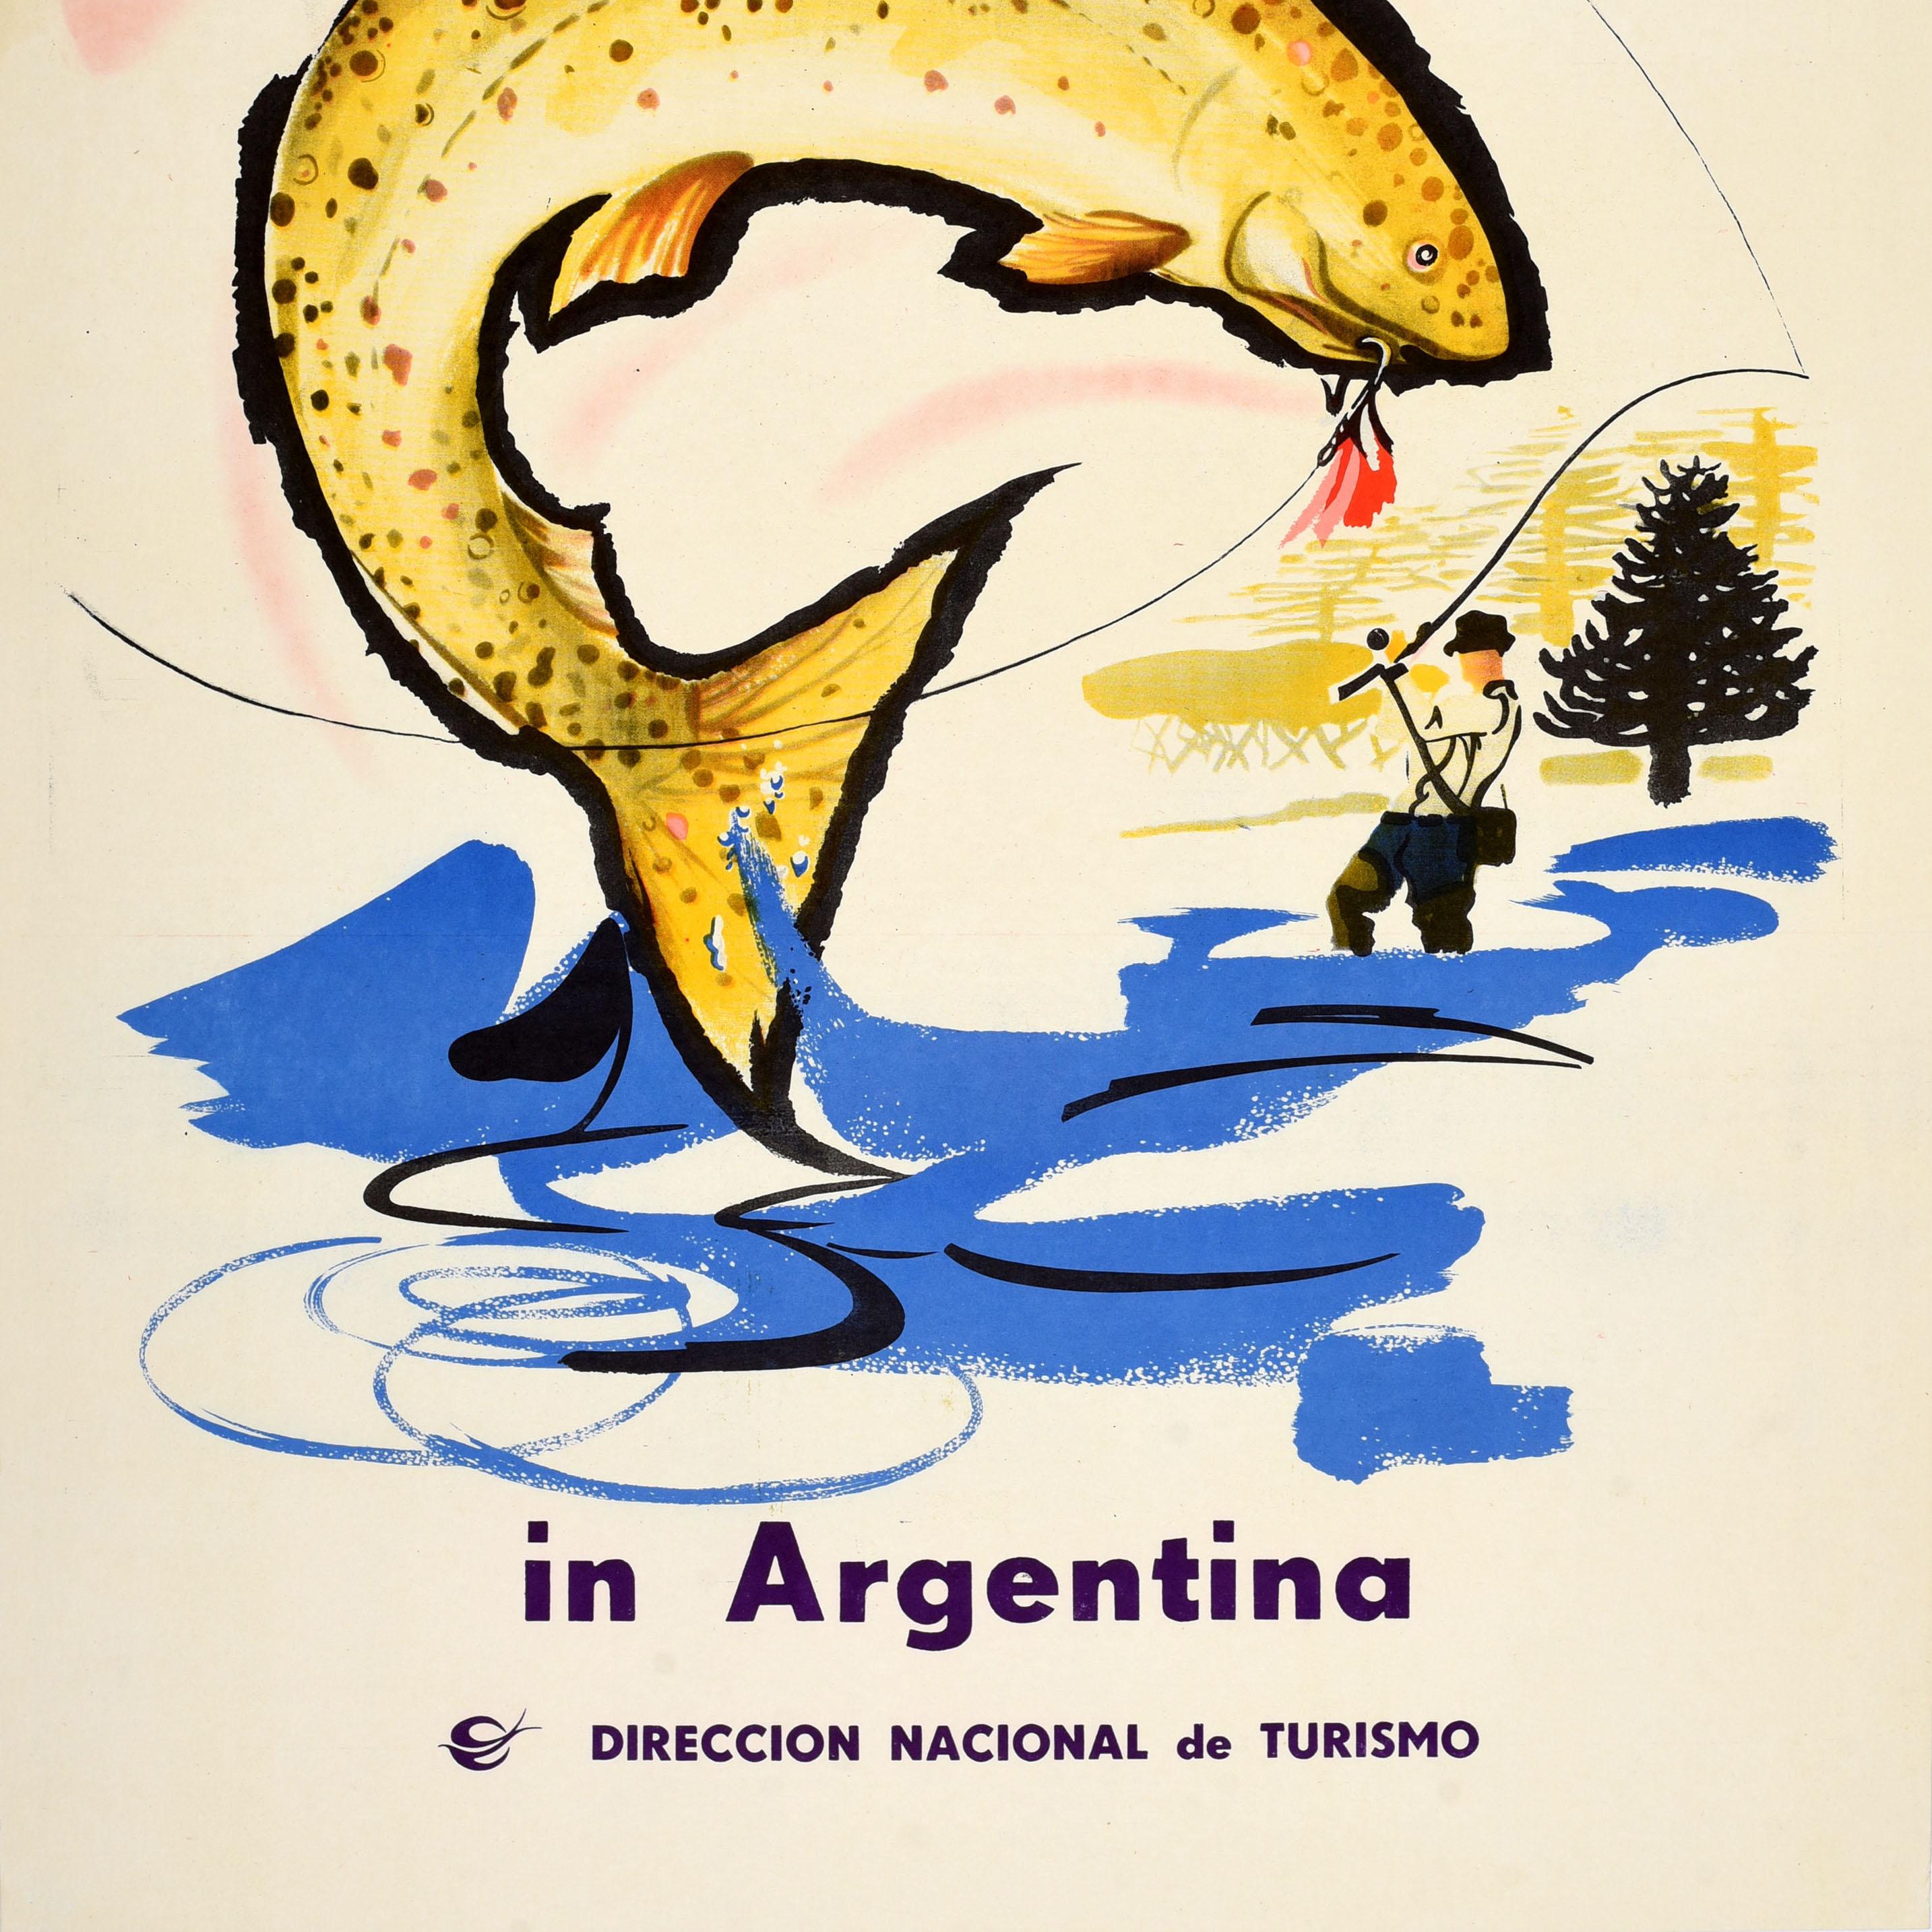 Original Vintage Travel Poster Fly Fishing Argentina Tourism Trout Fisherman In Excellent Condition For Sale In London, GB